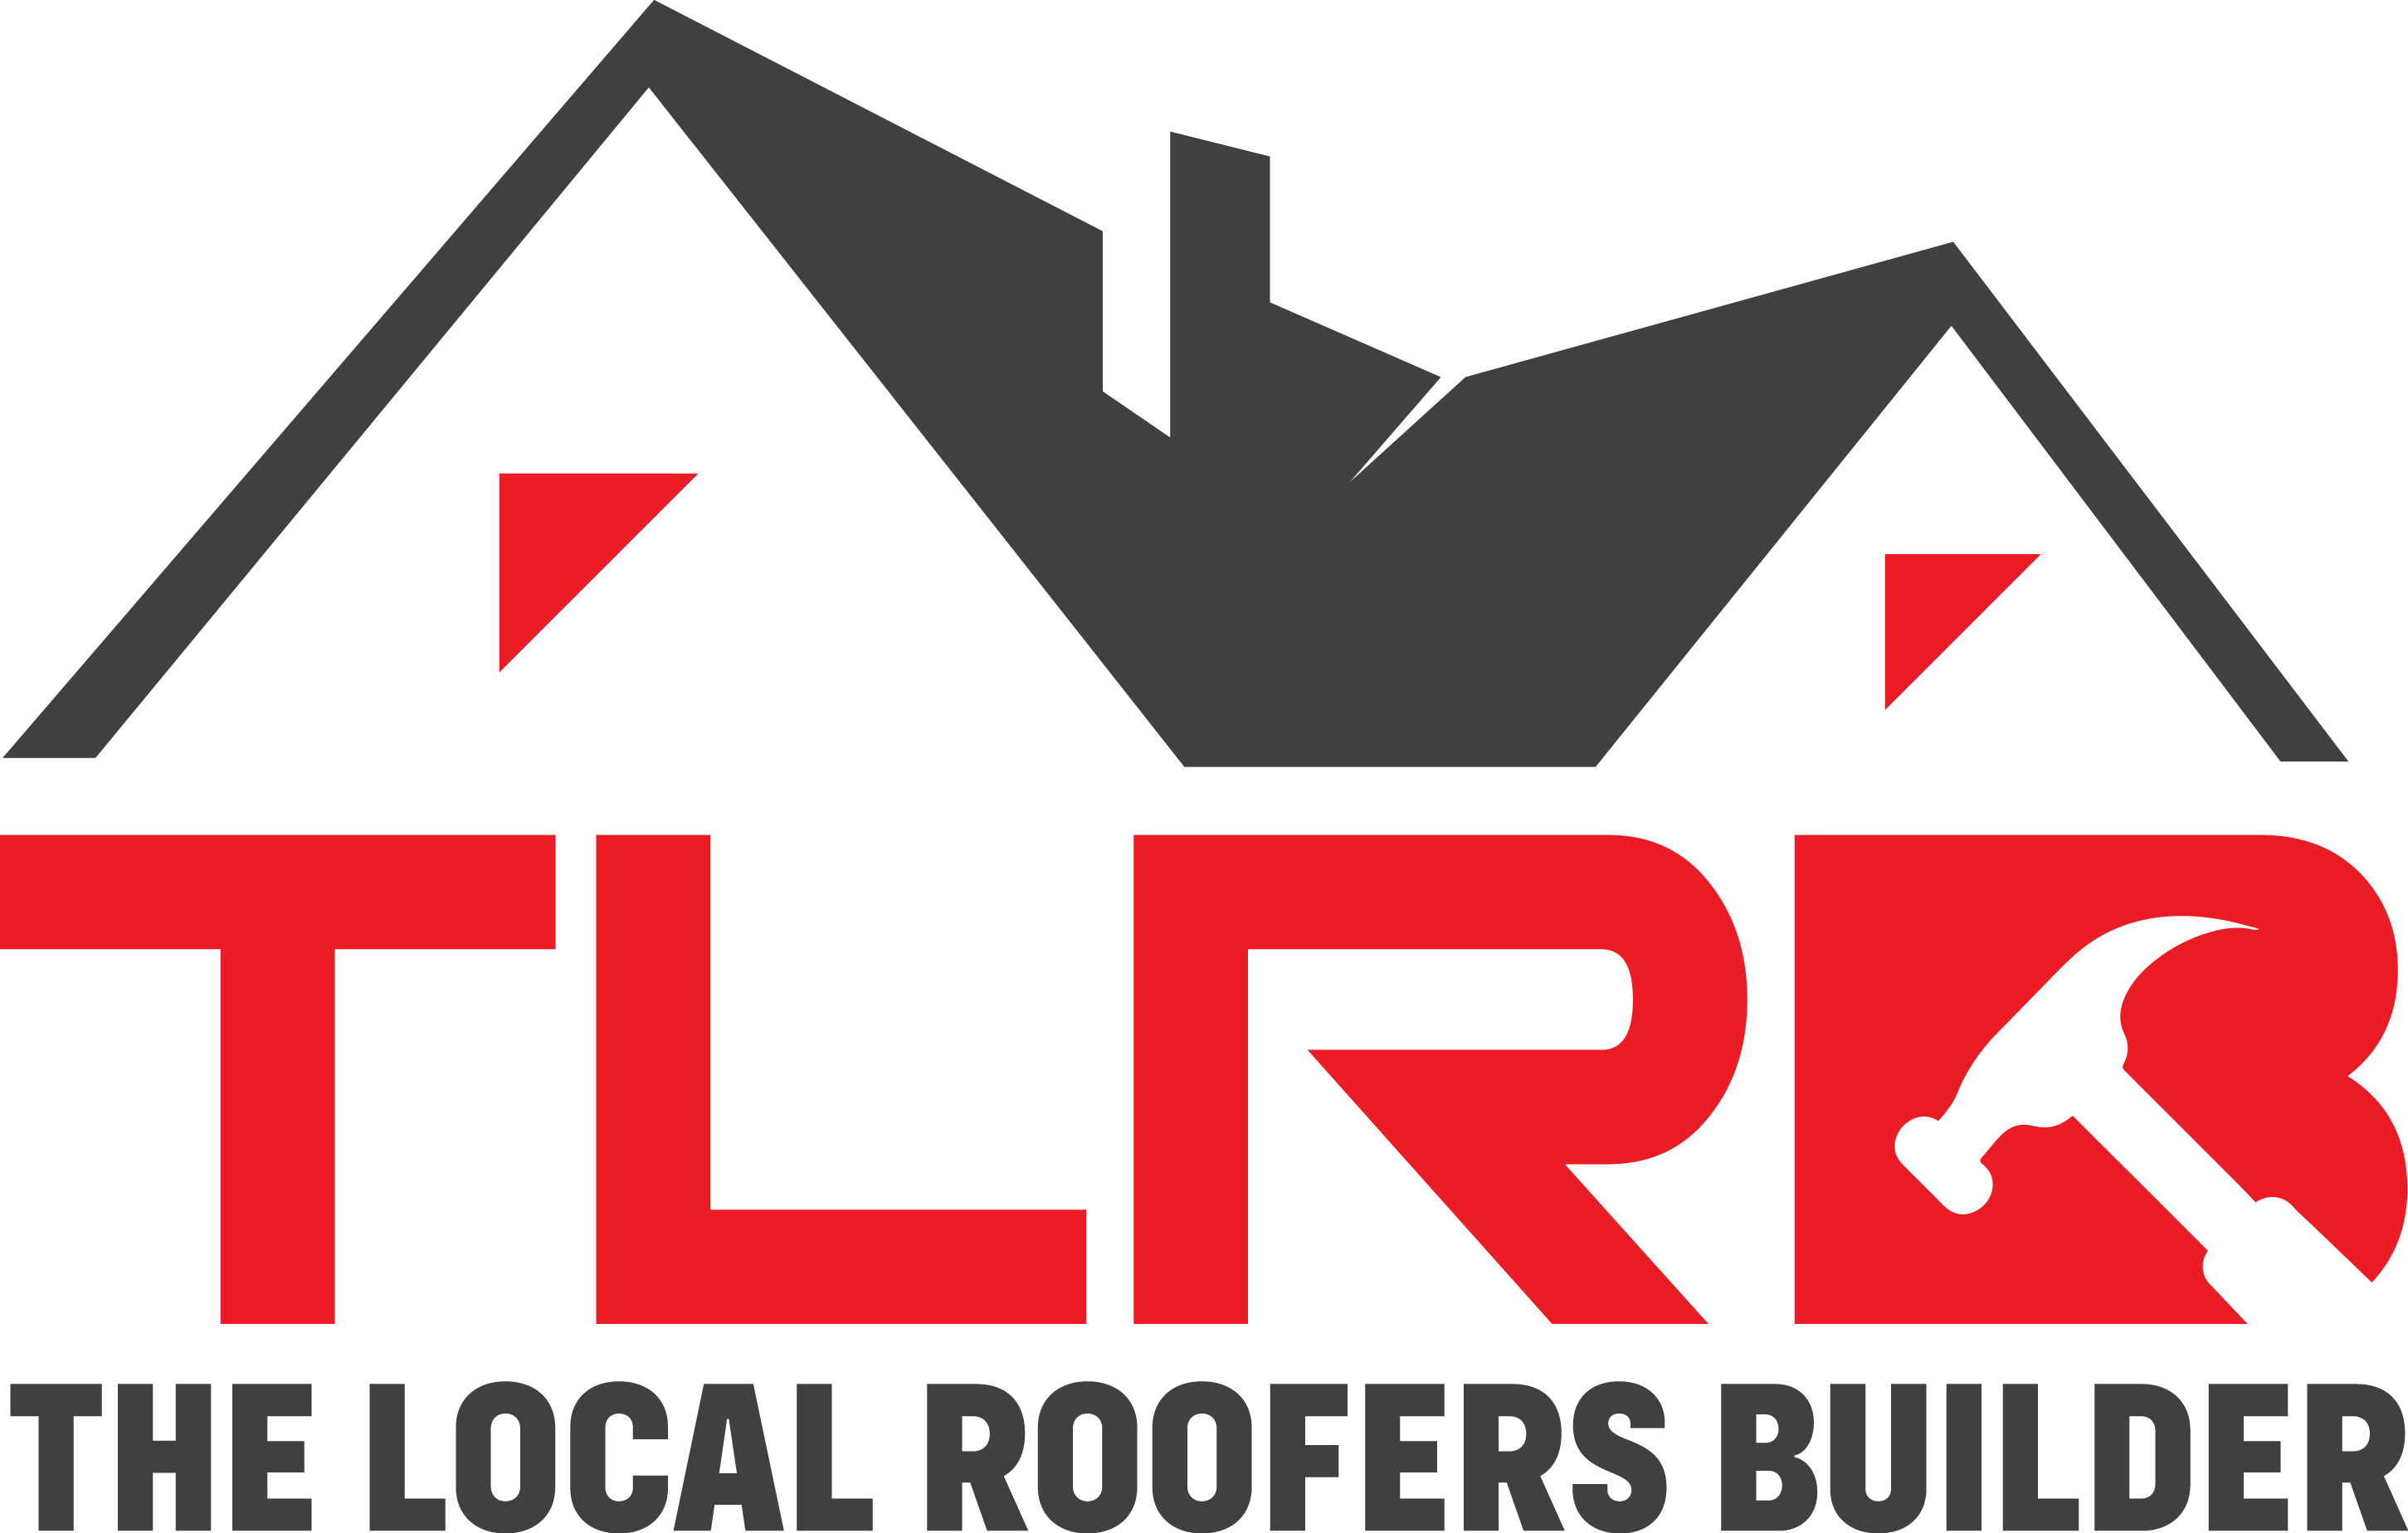 The Local Roofers Builder